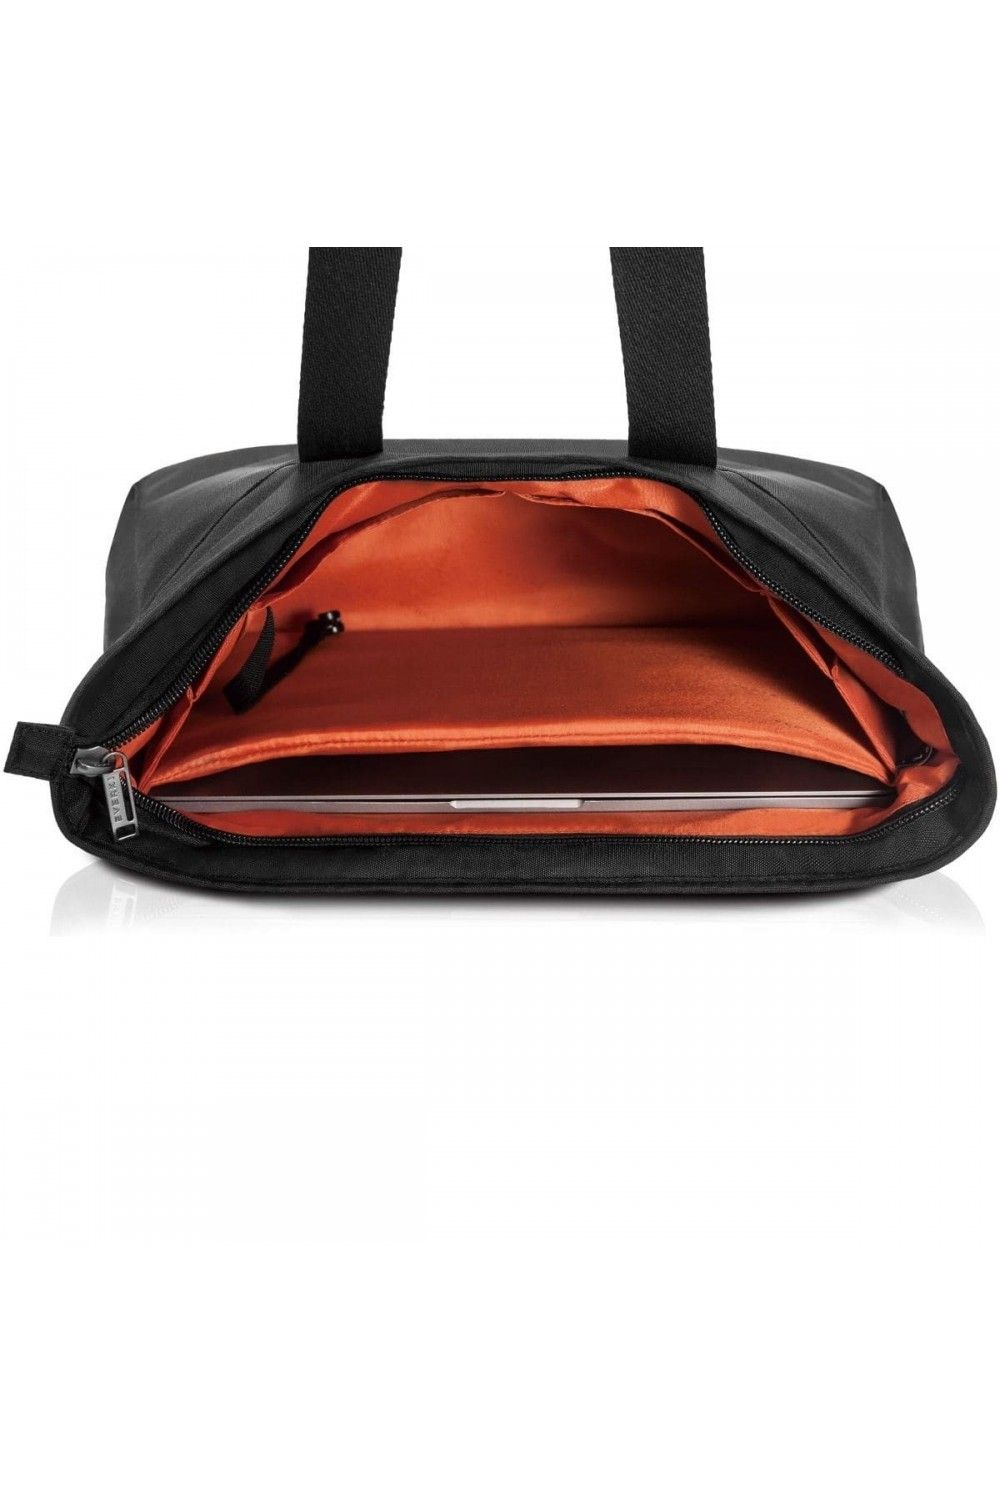 Everki handbag with laptop compartment 15.6 inches